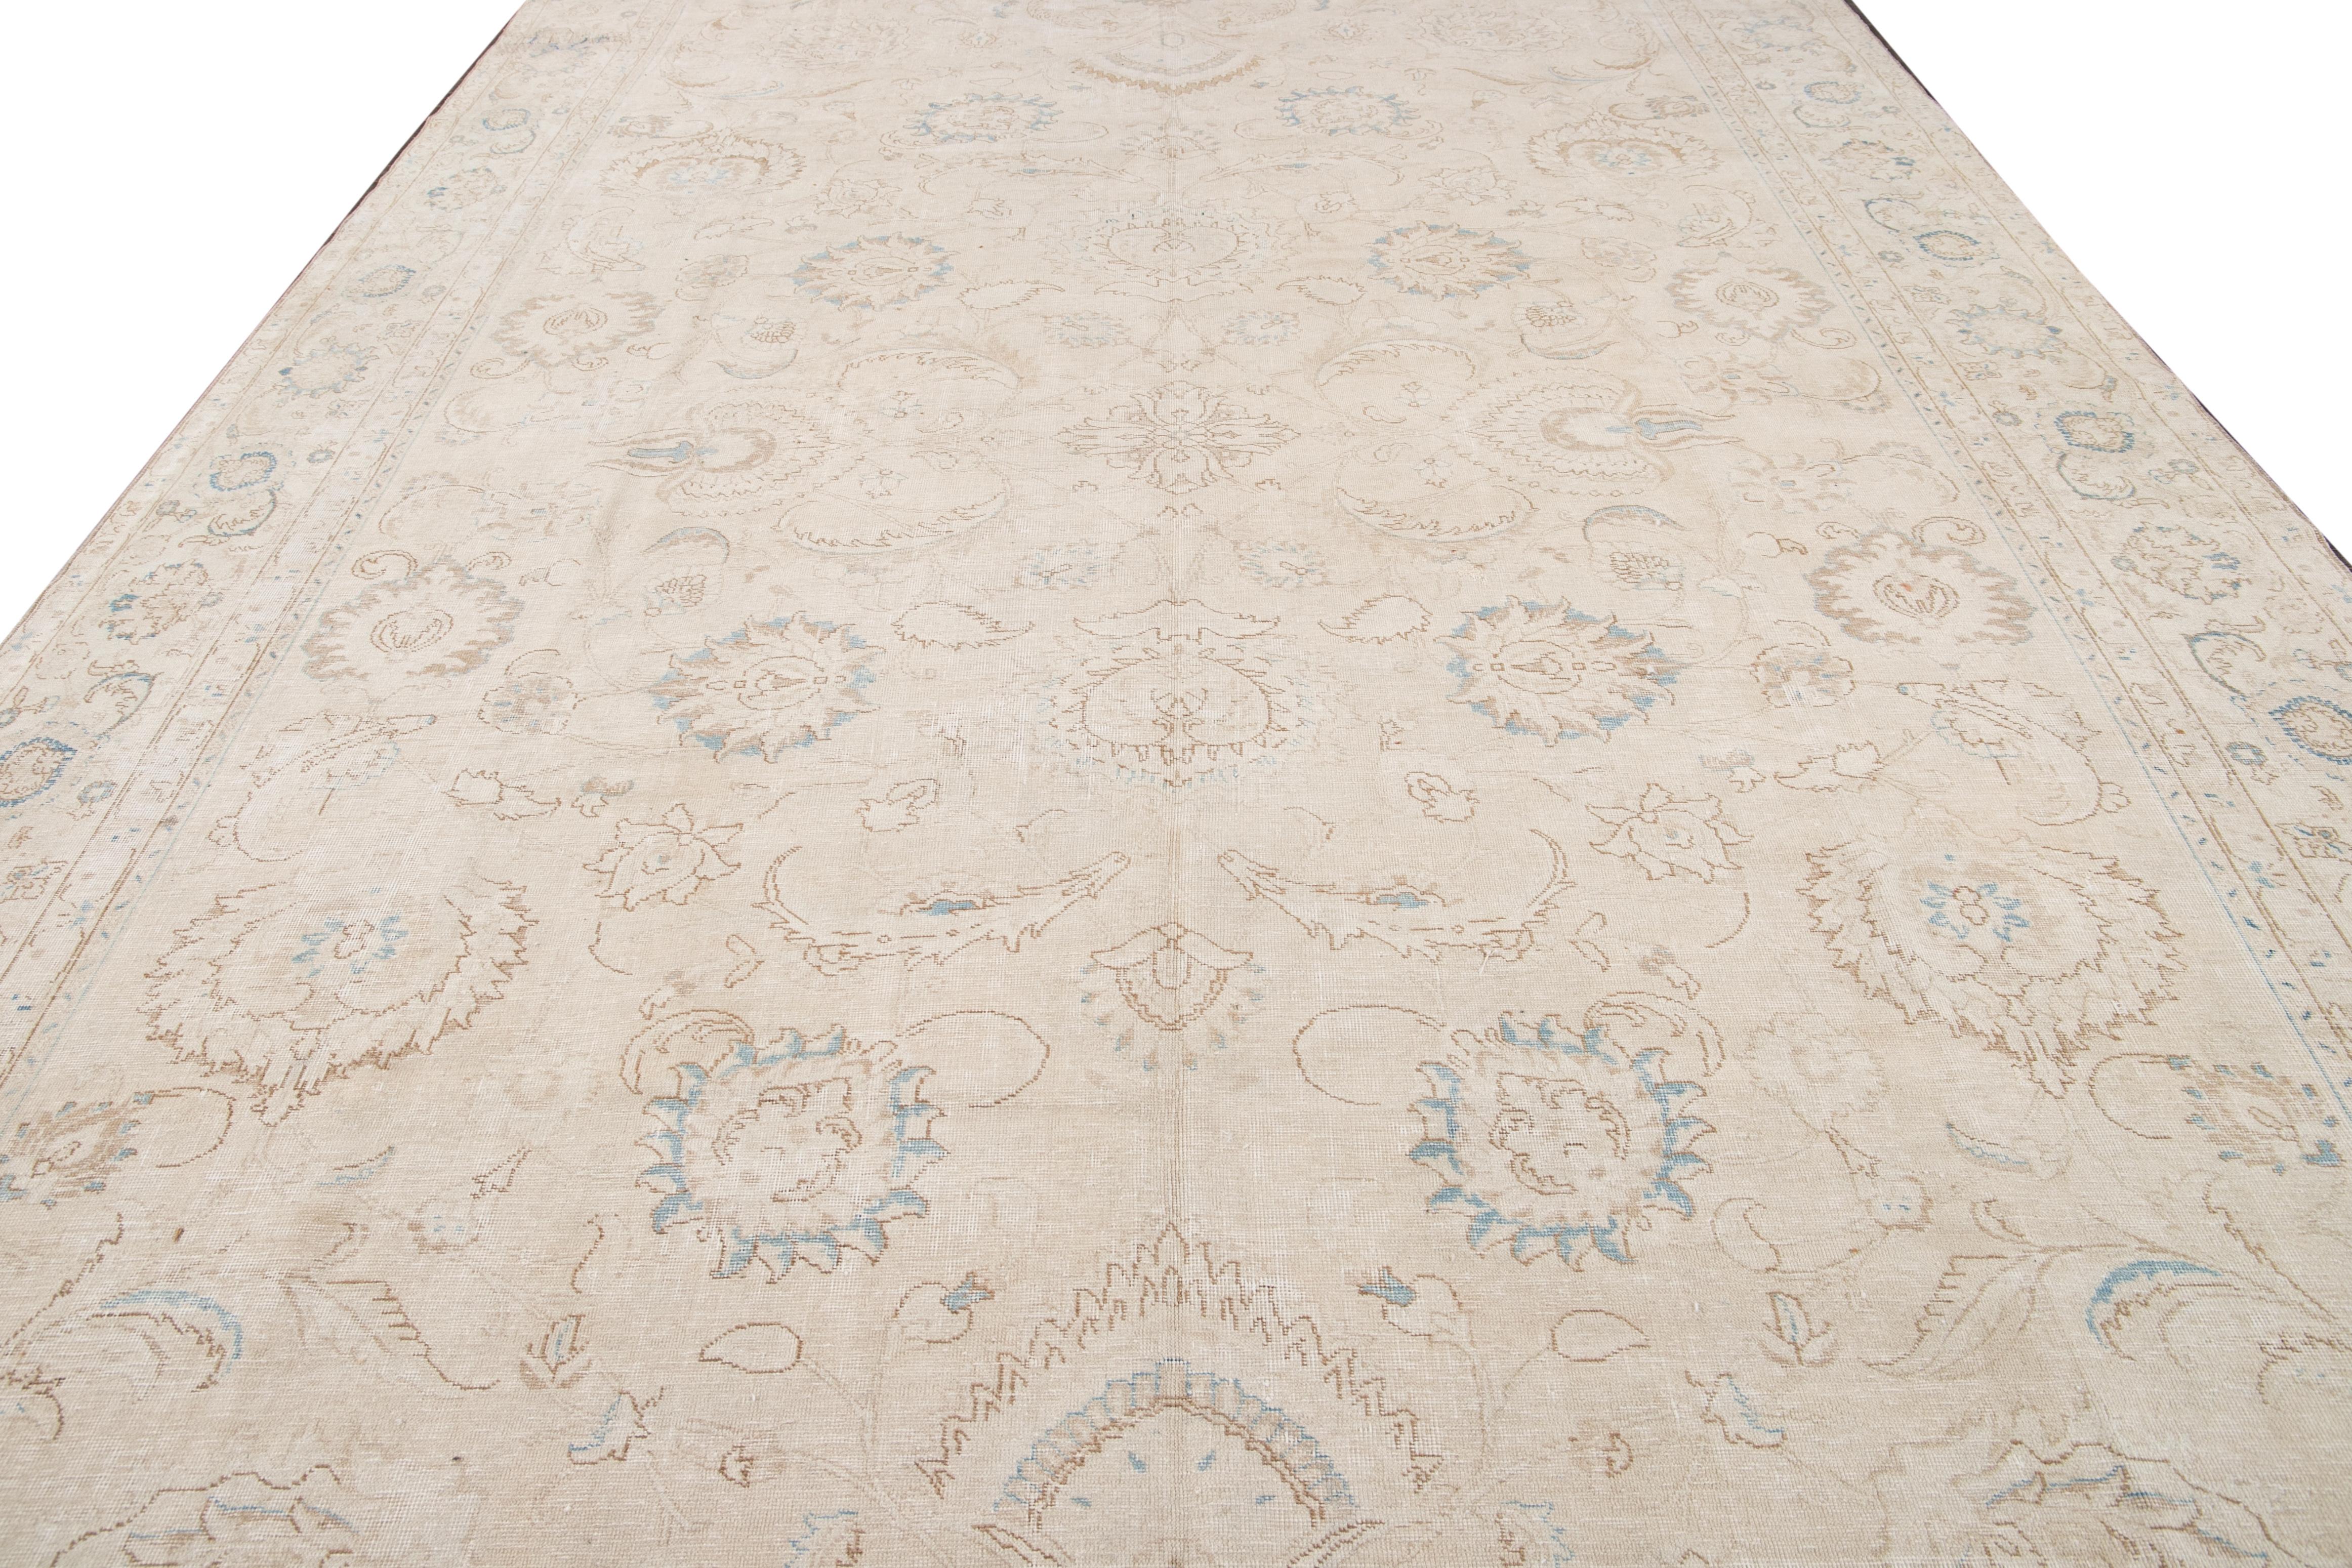 Beautiful antique Tabriz hand-knotted wool rug with a beige color field. This Persian rug has a blue and brown accent in a gorgeous all-over Shah Abbasi design.

This rug measures: 10'2